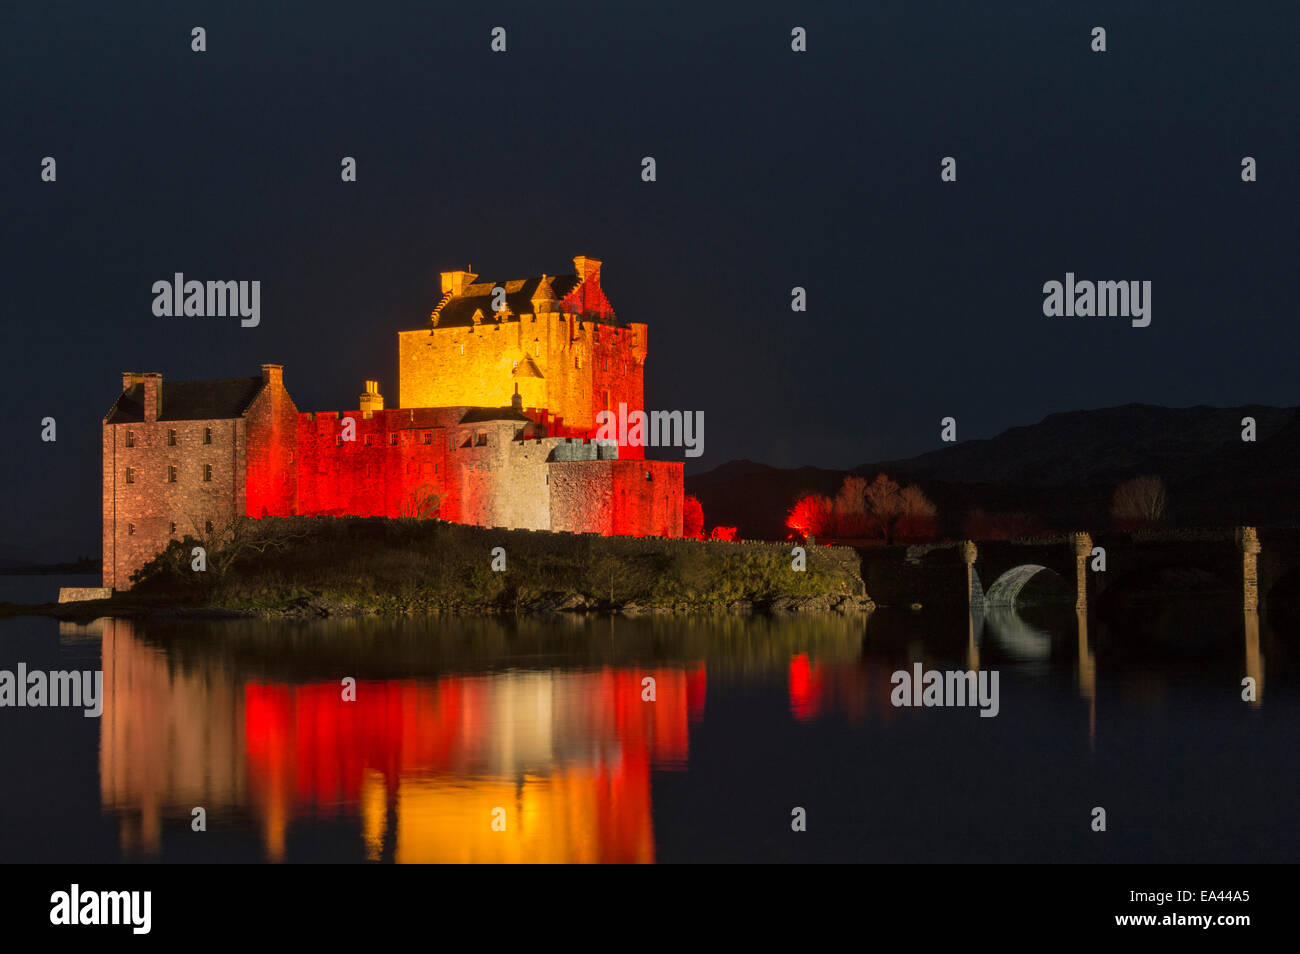 EILEAN DONAN CASTLE SCOTLAND AND BRIDGE WITH EVENING  RED LIGHTS RELECTED ON THE SEA LOCH  FOR ARMISTICE DAY NOVEMBER 11 2014 Stock Photo